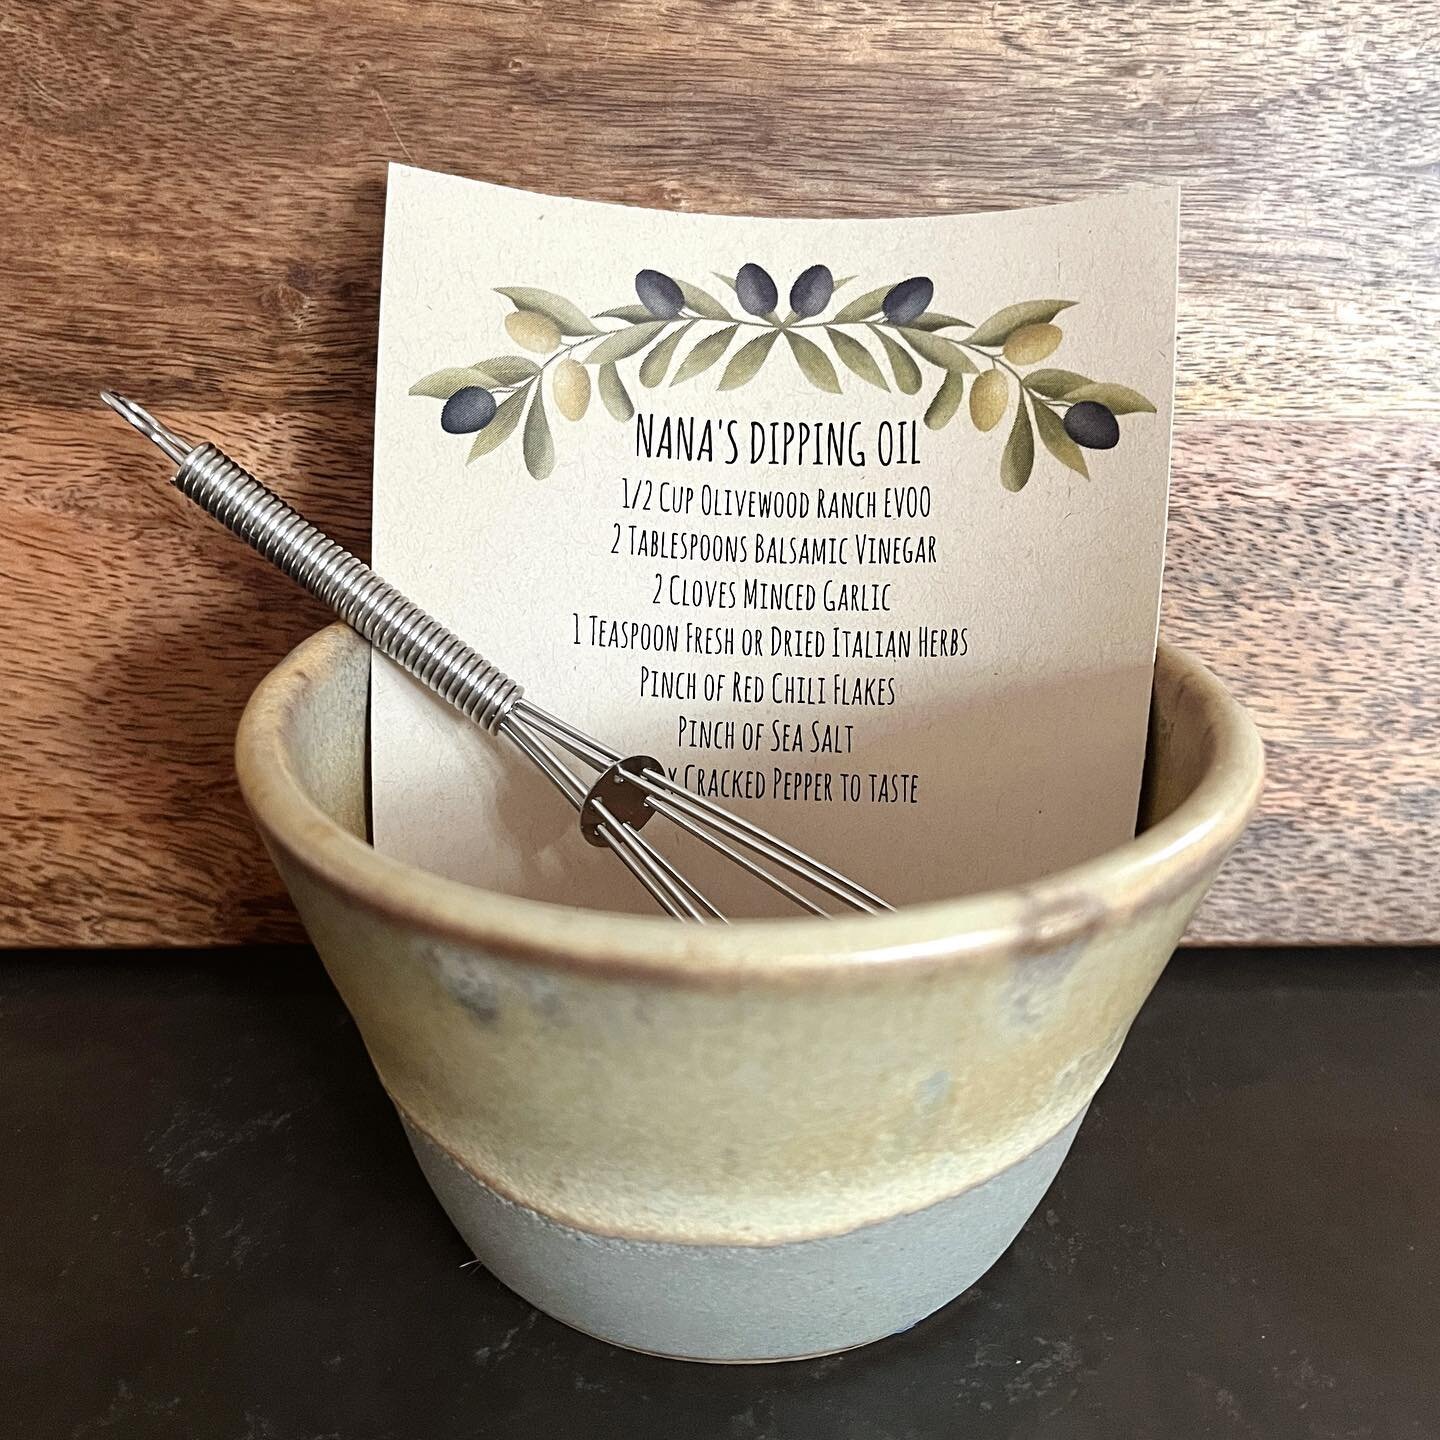 Mother&rsquo;s Day is near! Pair one of our oils with our one of a kind hand made pottery dipping bowls💐 We have a selection to choose from in the office Mon-Fri! 4171 Suisun Valley Rd. Ste. H Suisun Valley, Ca. 94534